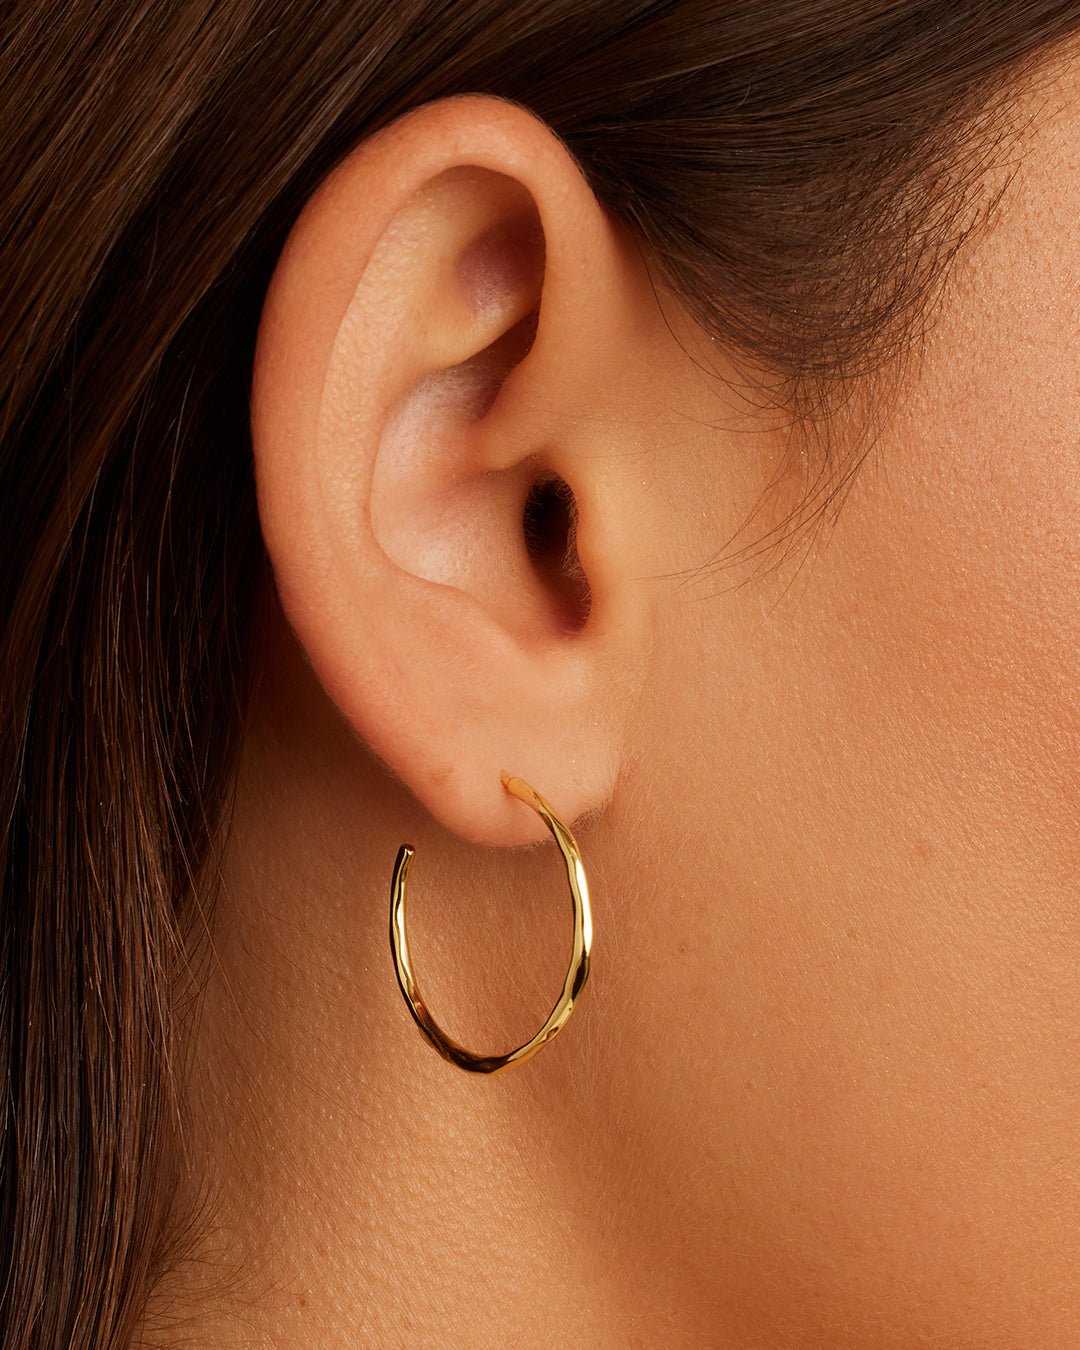 Taner Small Hoops || option::Gold Plated